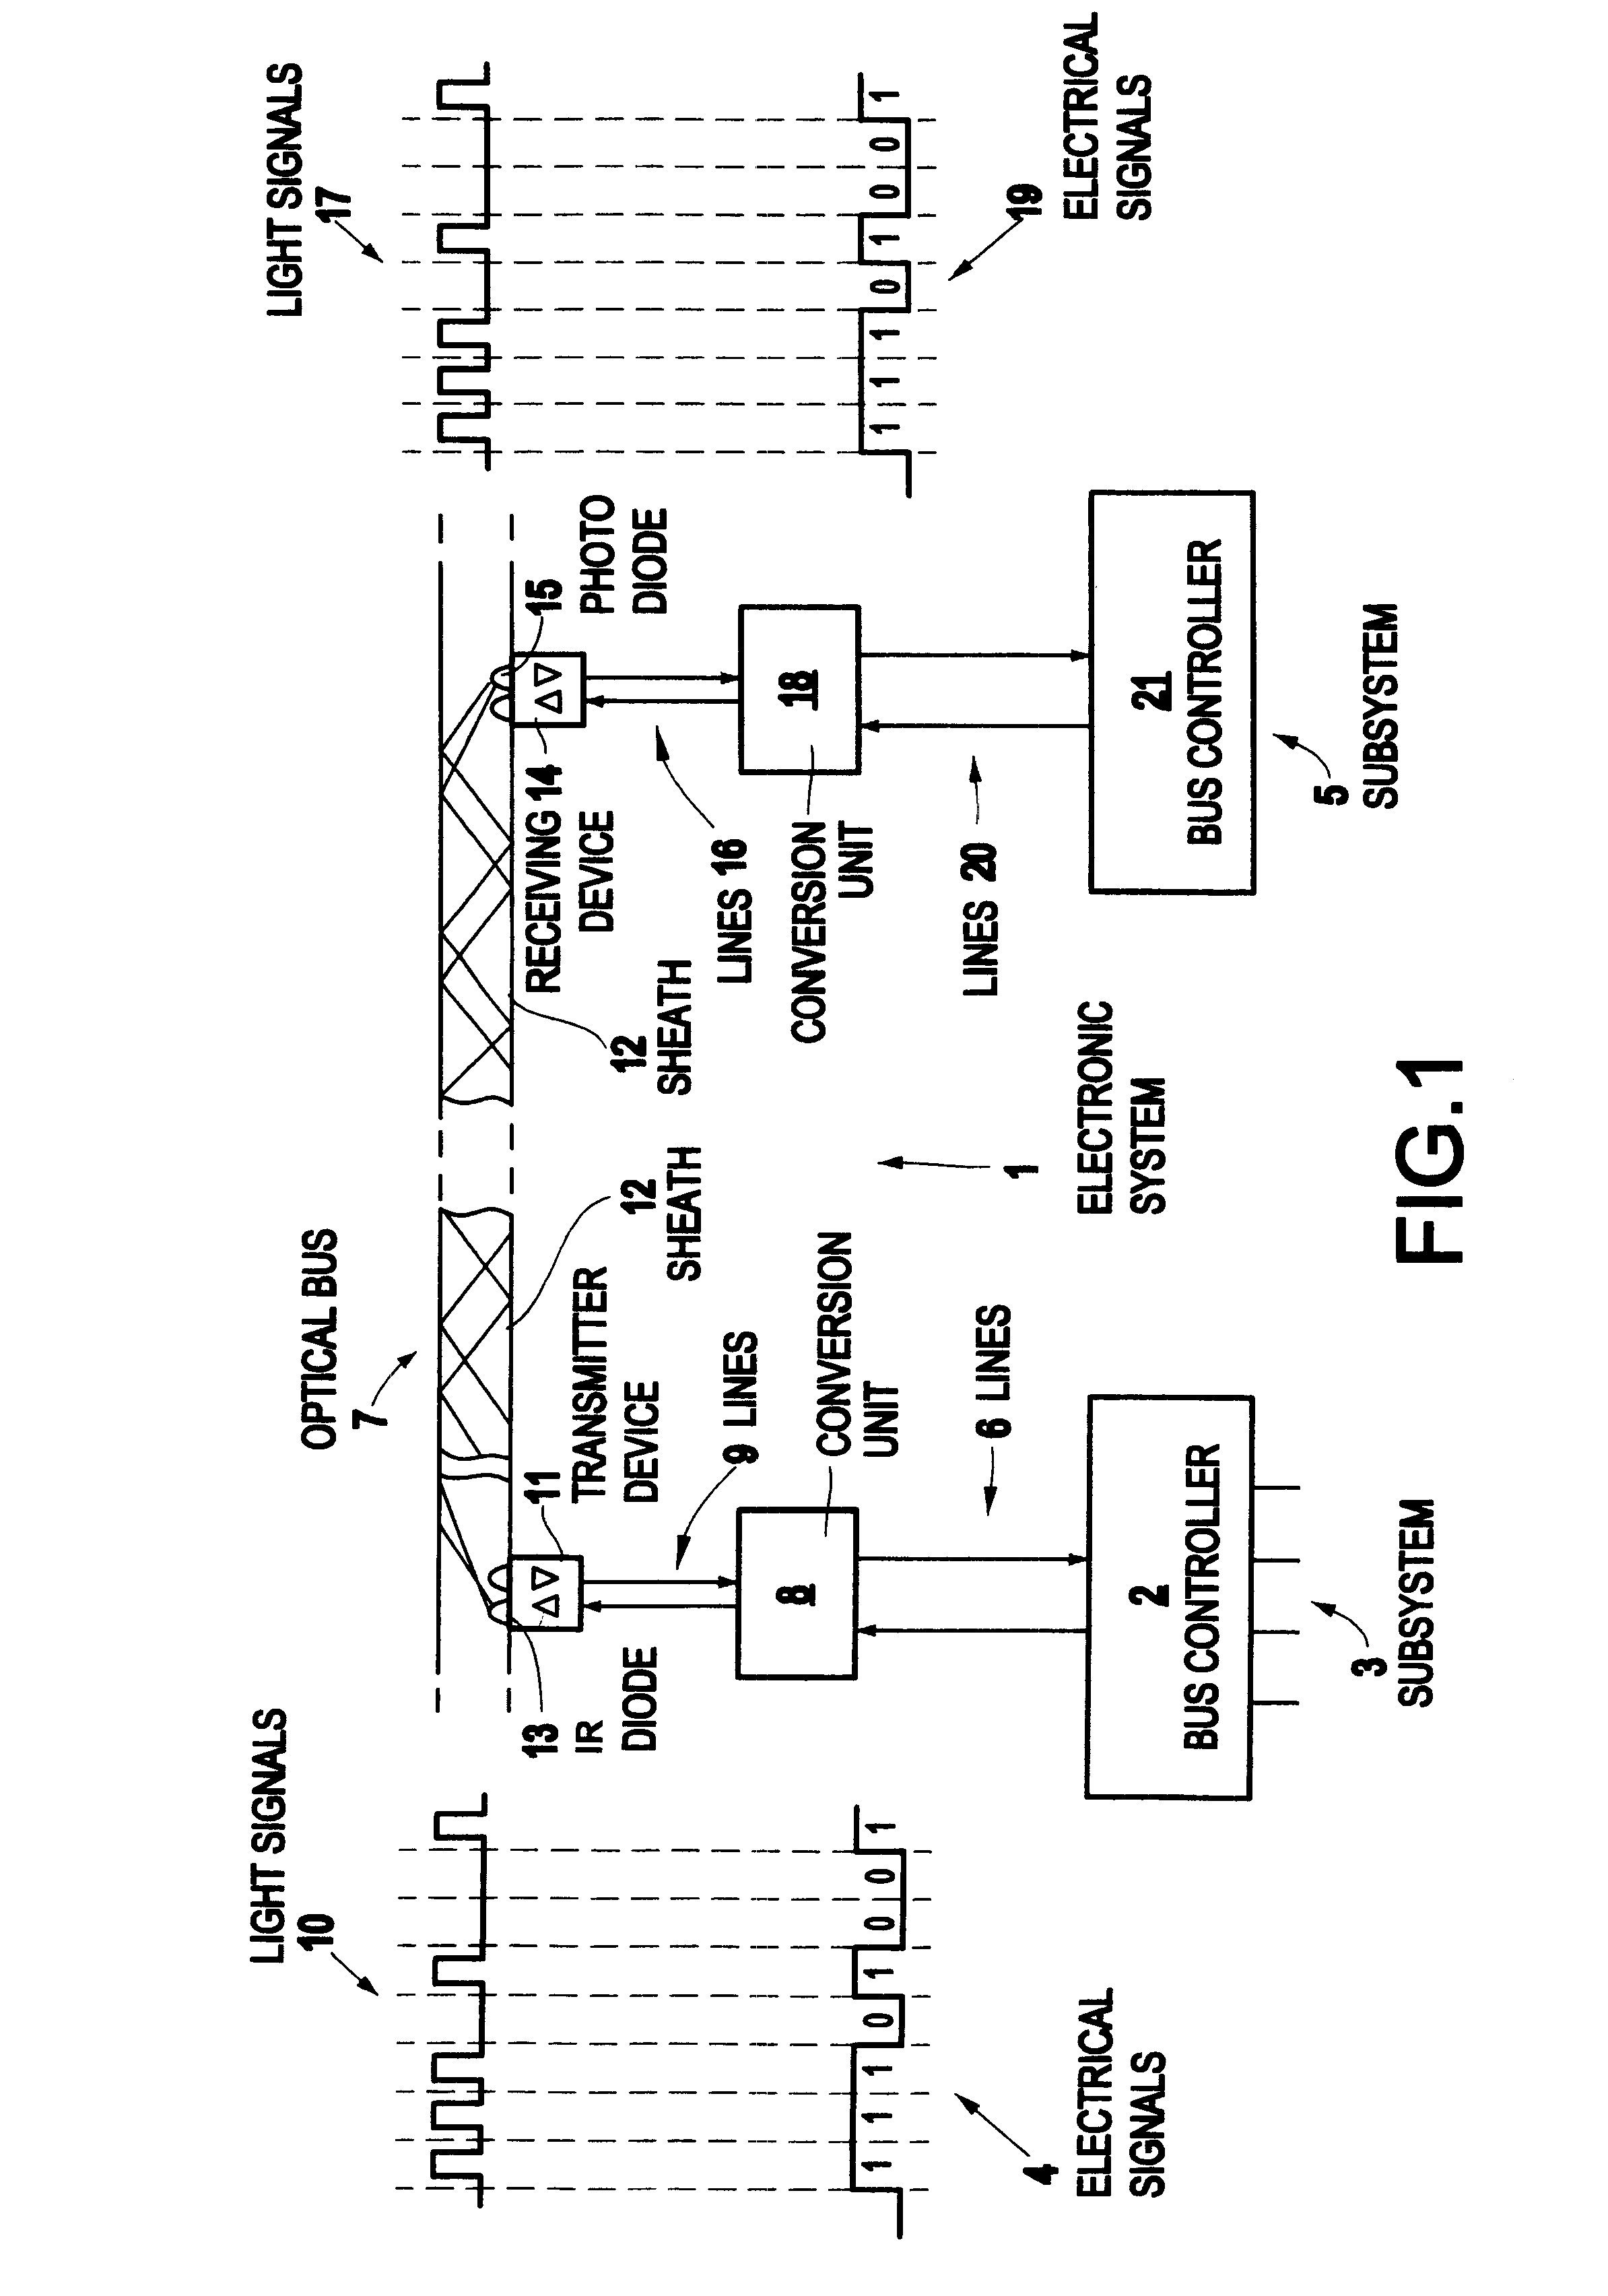 Optical bus system and method